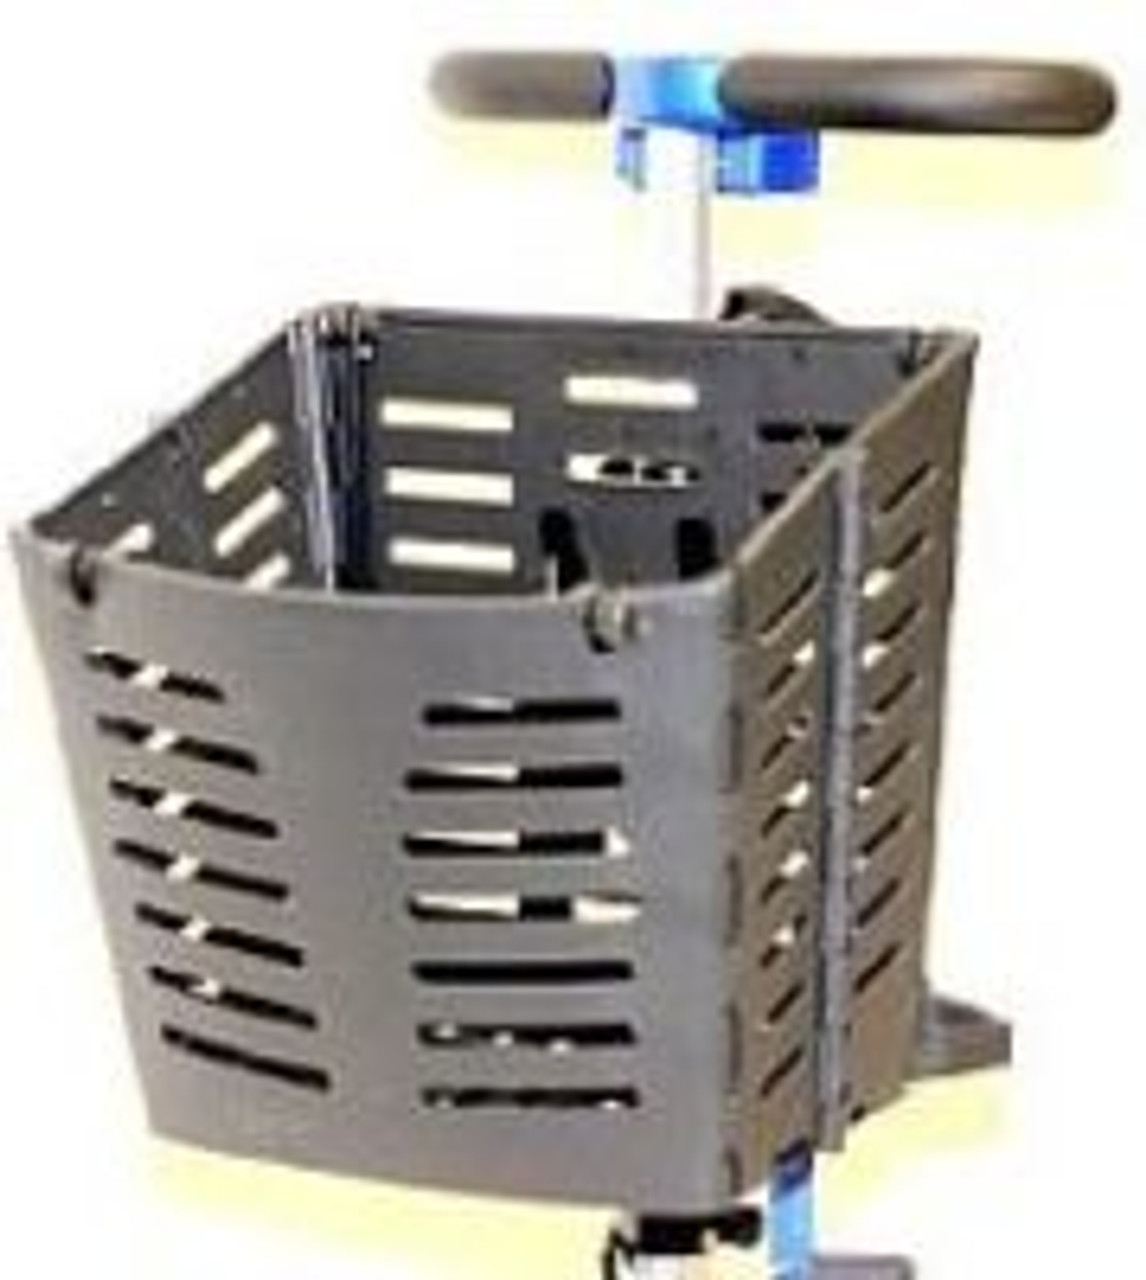 FOLDING BASKET (for Transformer and the Mobie Plus)